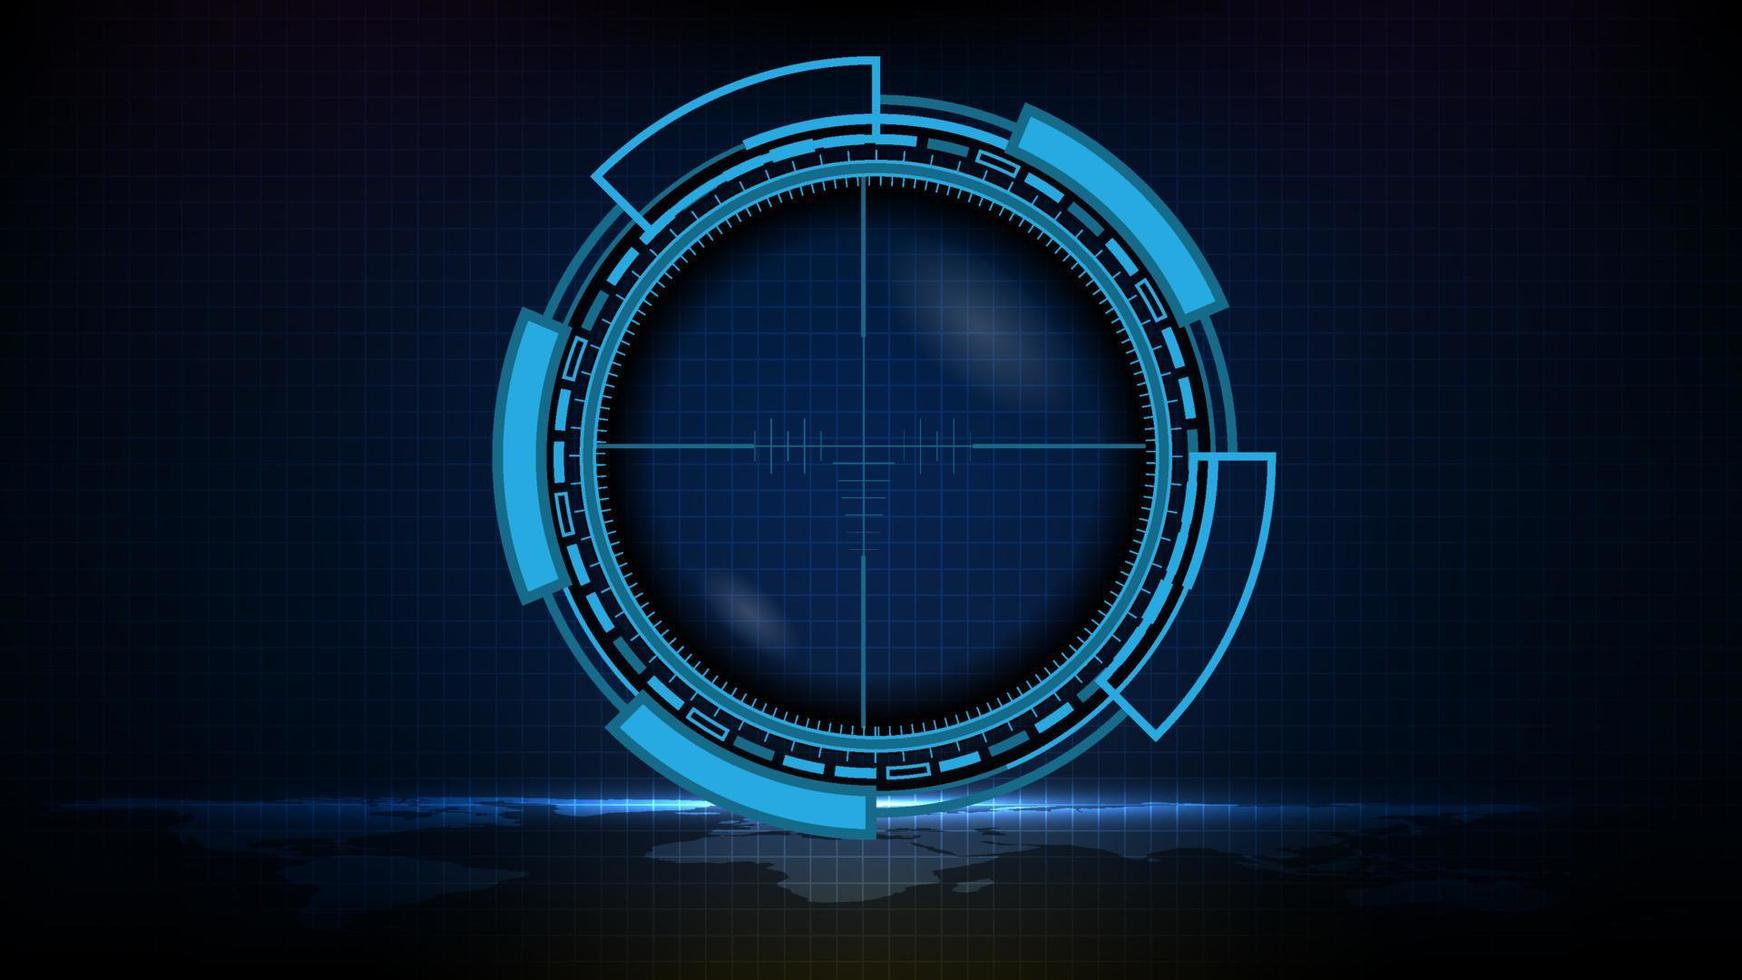 abstract futuristic background of blue technology sniper sight with measurement marks ui hud display sniper longest range gun vector